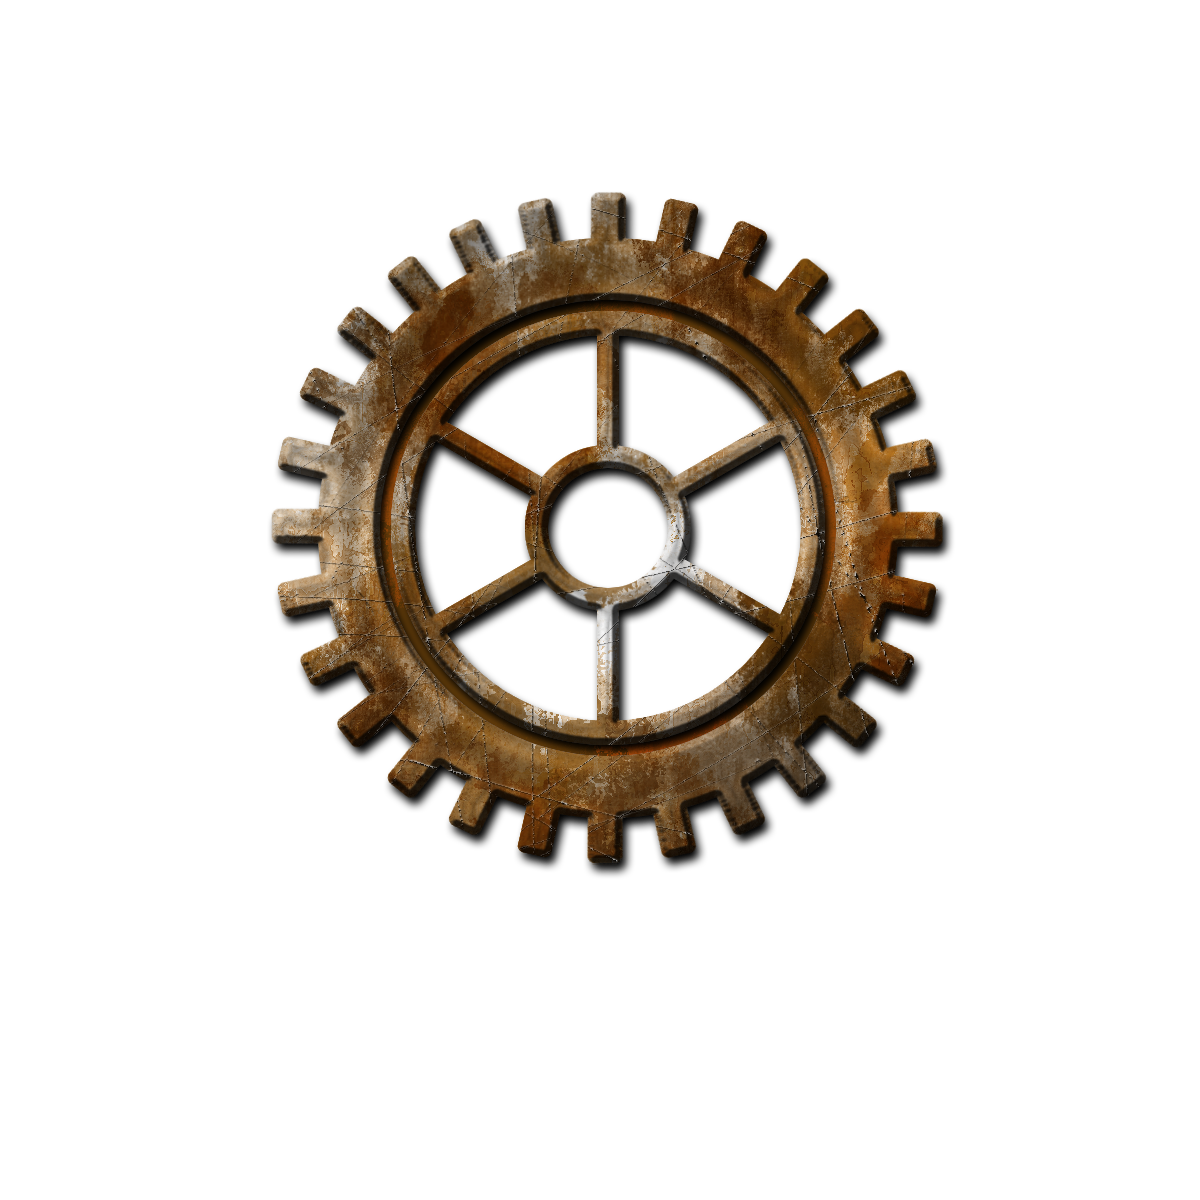 steampunk png